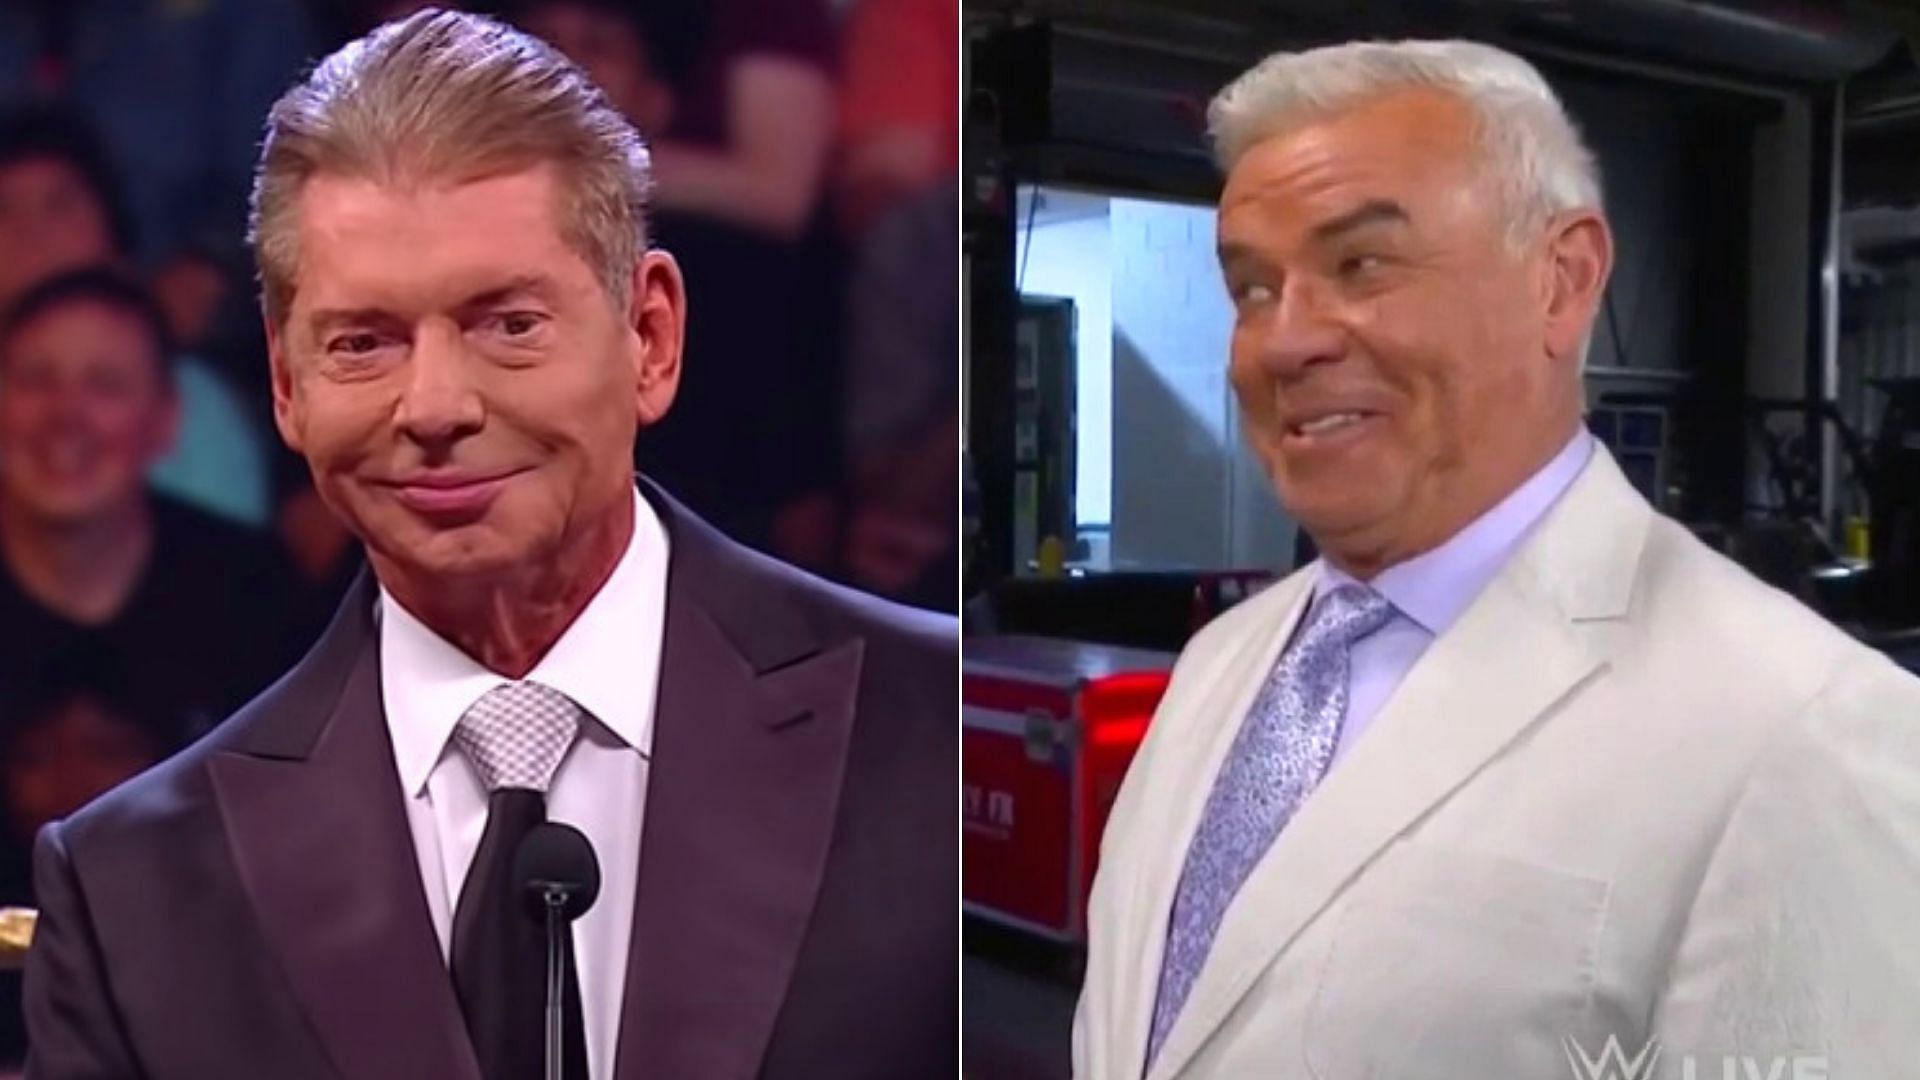 Could Vince McMahon sign a top AEW star?